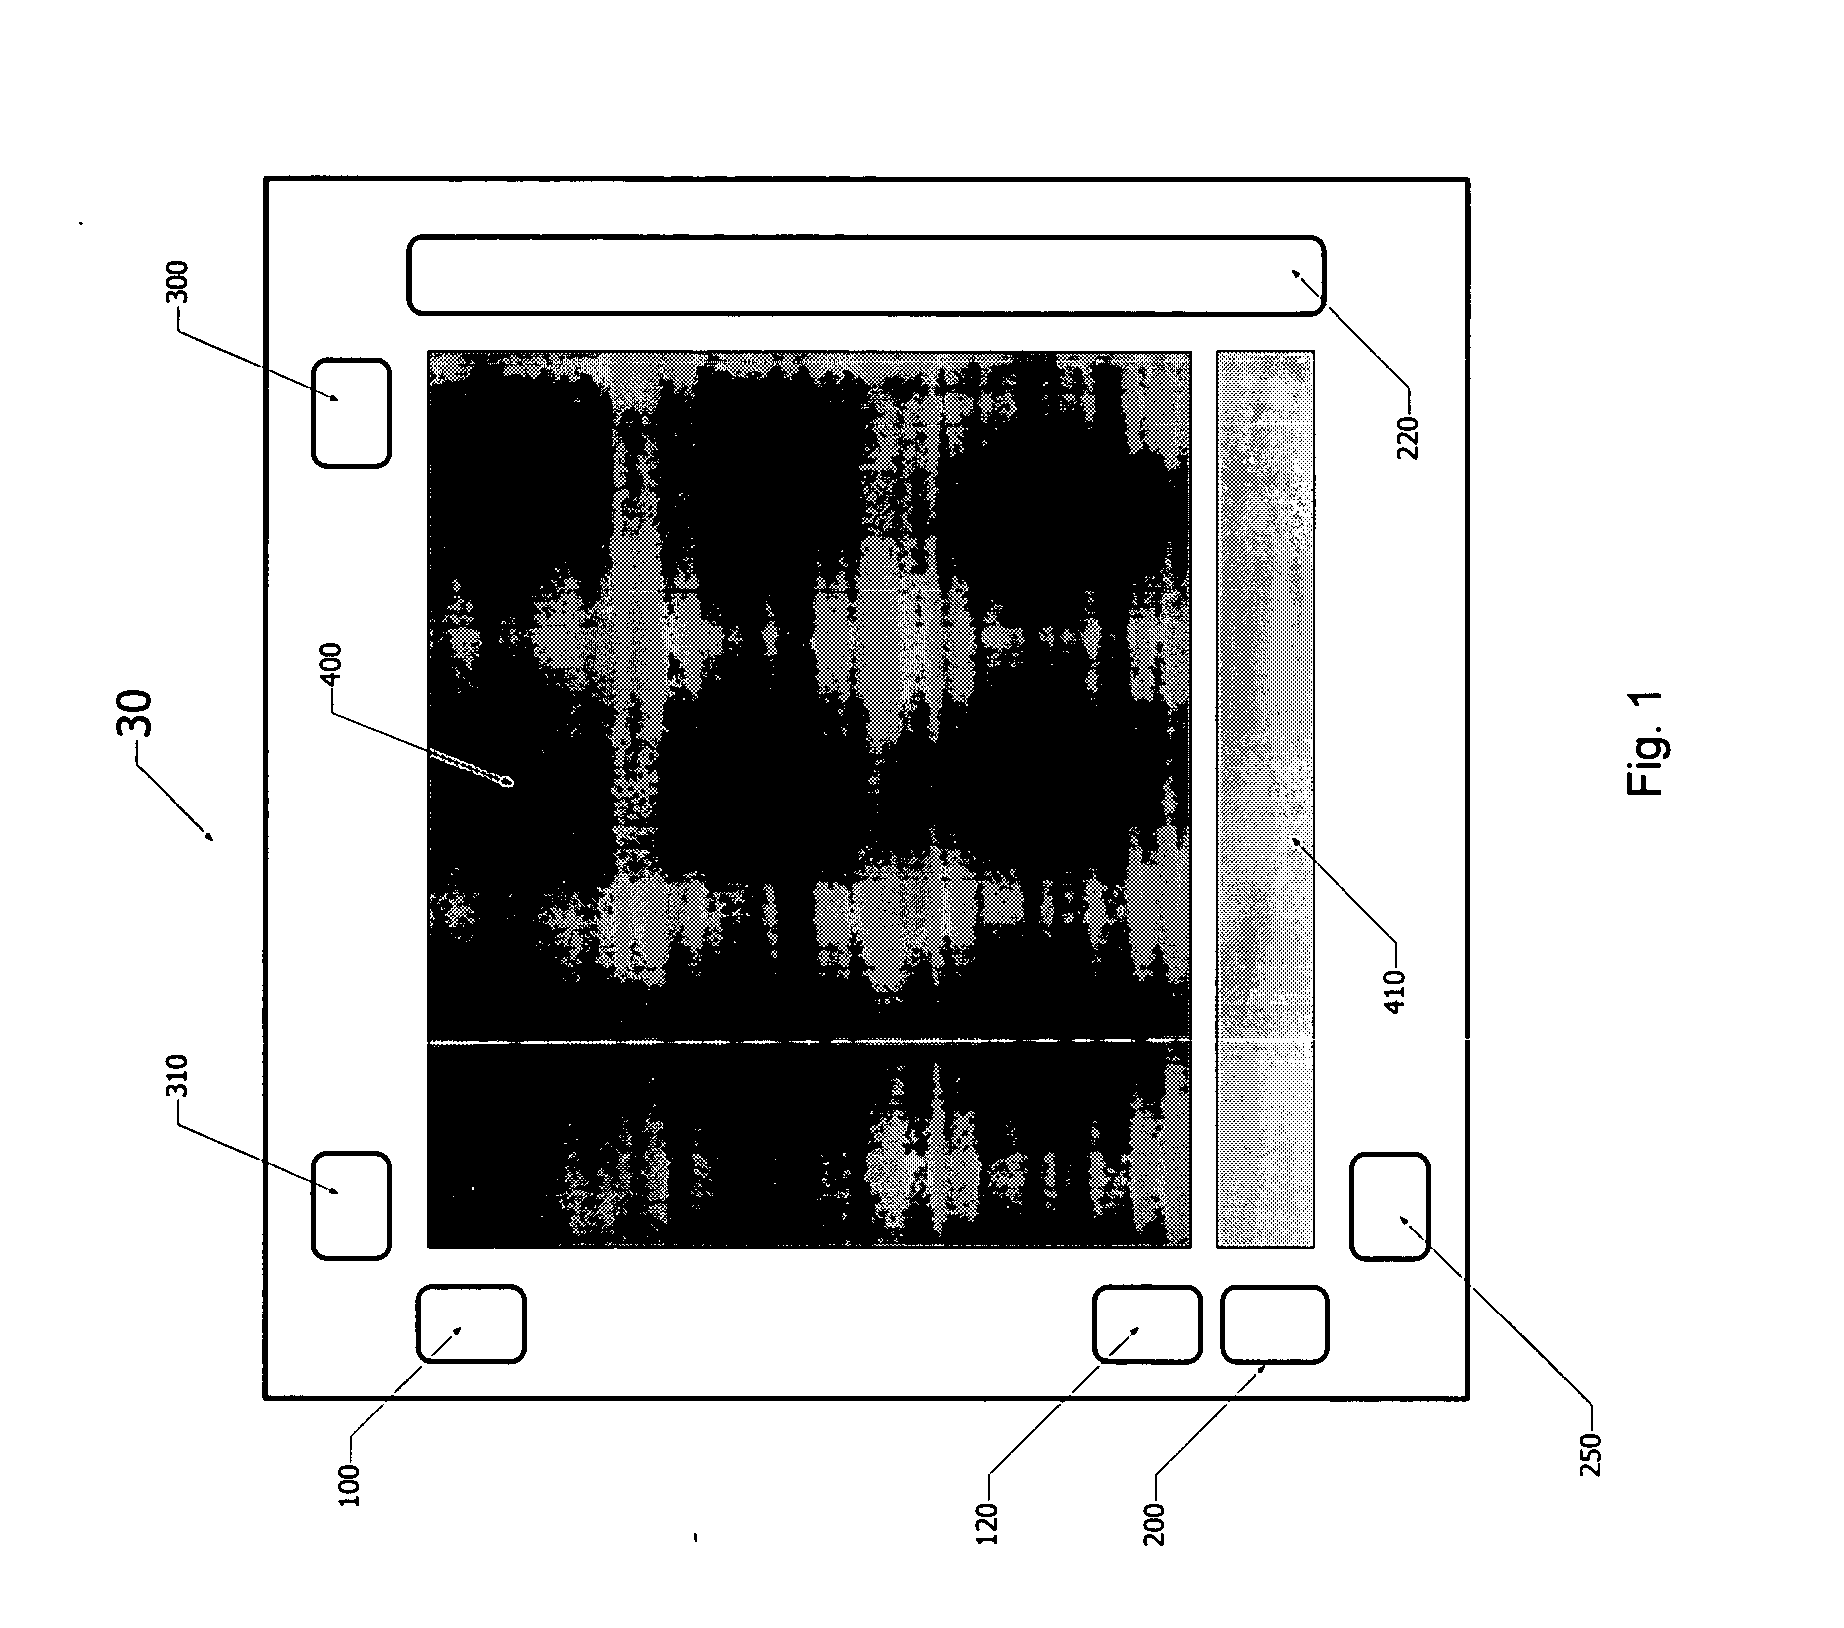 Fuel cell with in-cell humidification